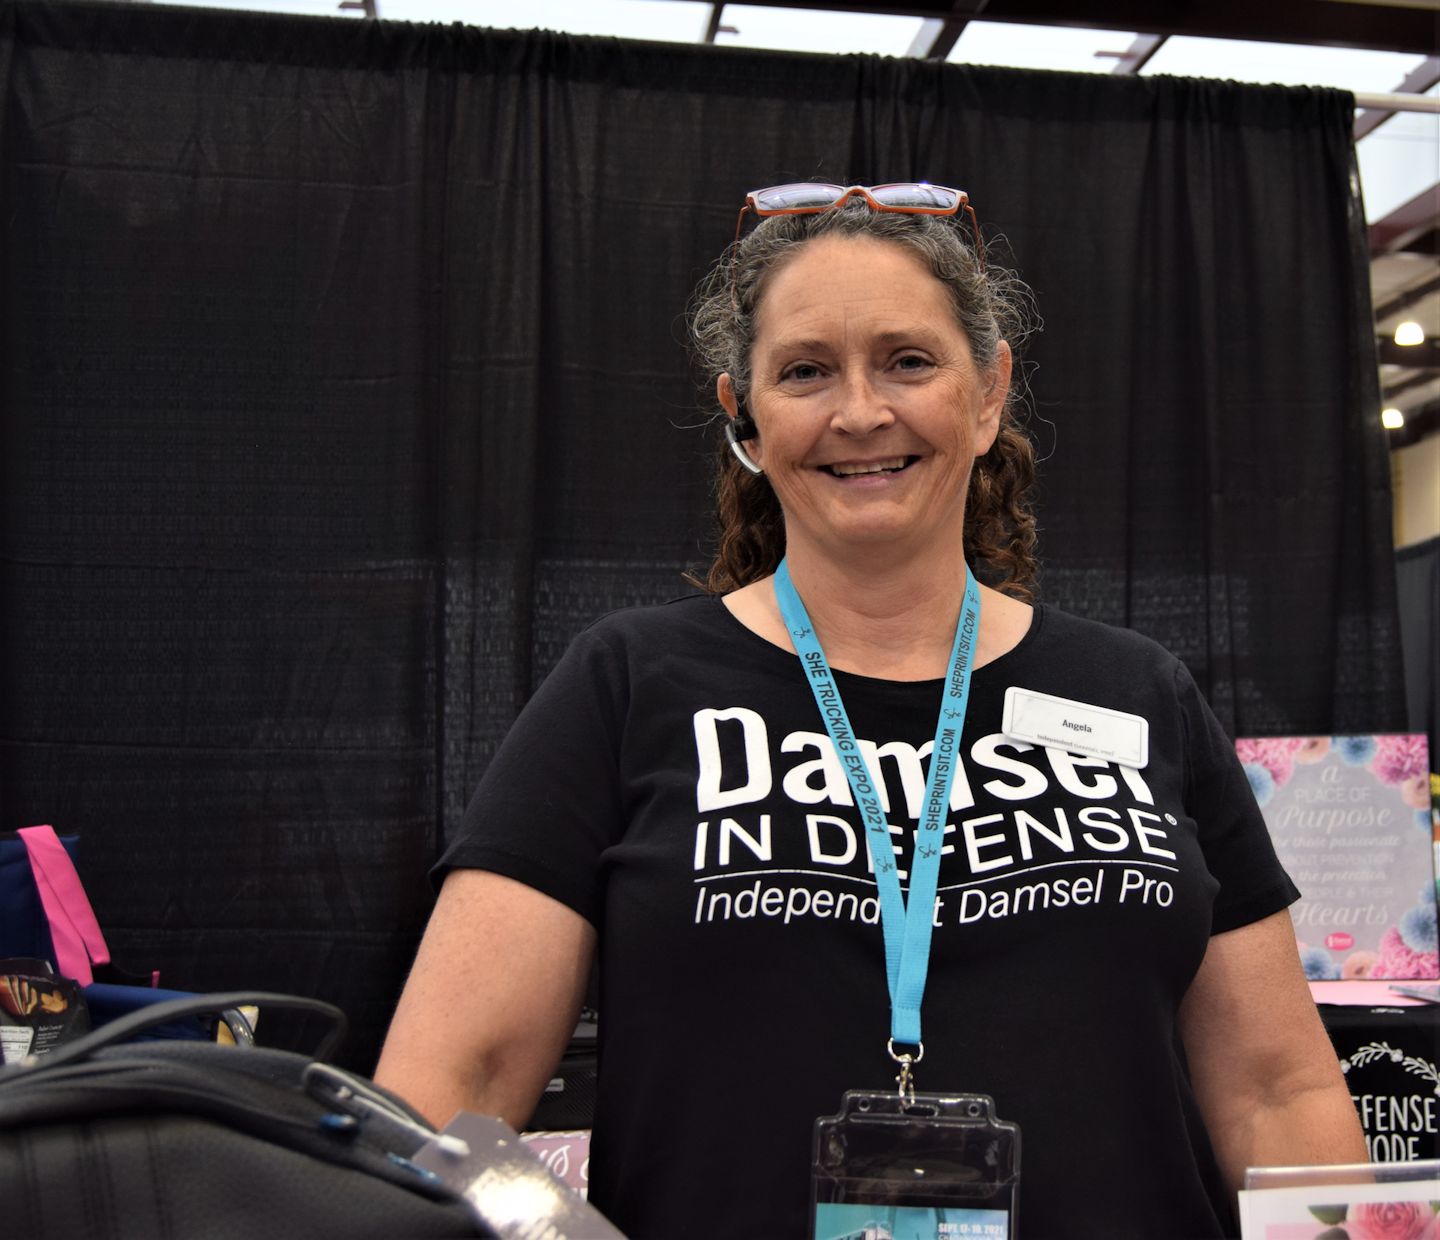 Among exhibitors was Angela Shufeldt, an independent reseller of Damsel in Defense products and an inland intermodal hauler for J.B. Hunt. As with Richardson, Shufeldt comes to the personal-safety/self-defense arena driven by personal experiences in past she wishes today she'd been better prepared for.